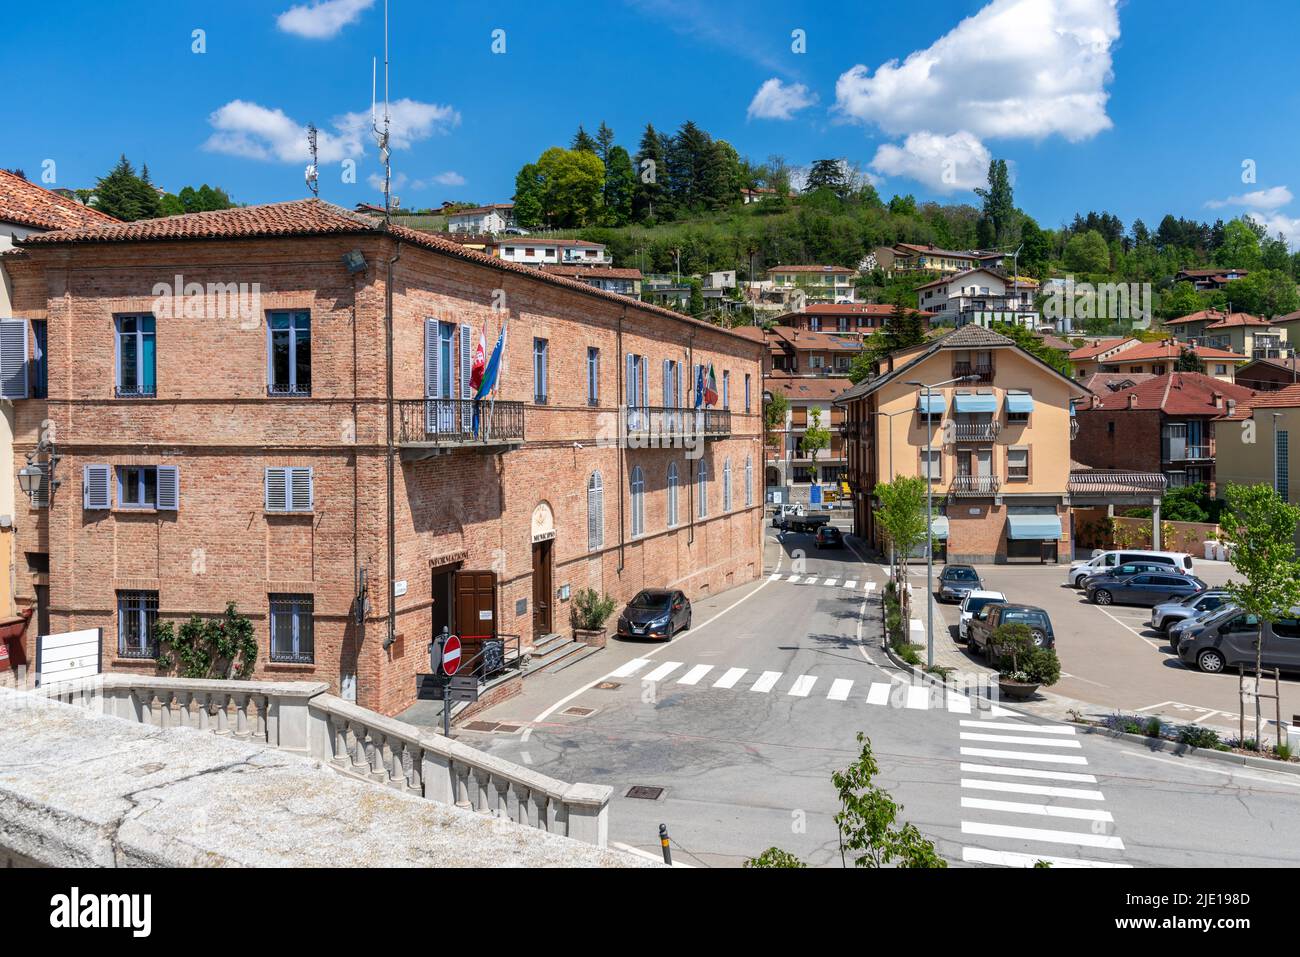 Monforte d'Alba, langhe, Italy - May 02, 2022: the town hall building of Monforte d'Alba village on the Langhe hill of the barolo wine vineyards Stock Photo